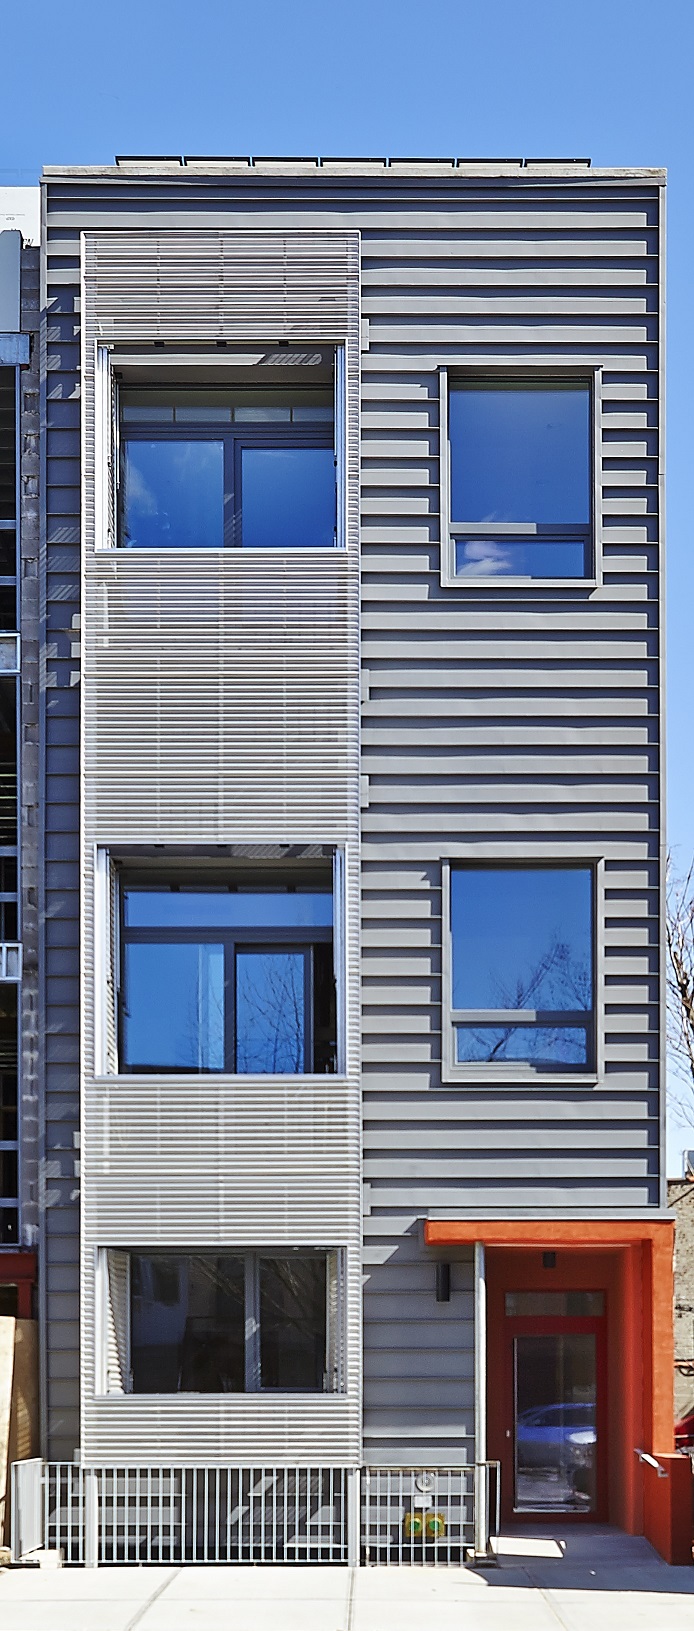 R-951 Residence: NYC Passive House + Net Zero Row House by Paul A. Castrucci, Architect. Photo: Timothy Bell.